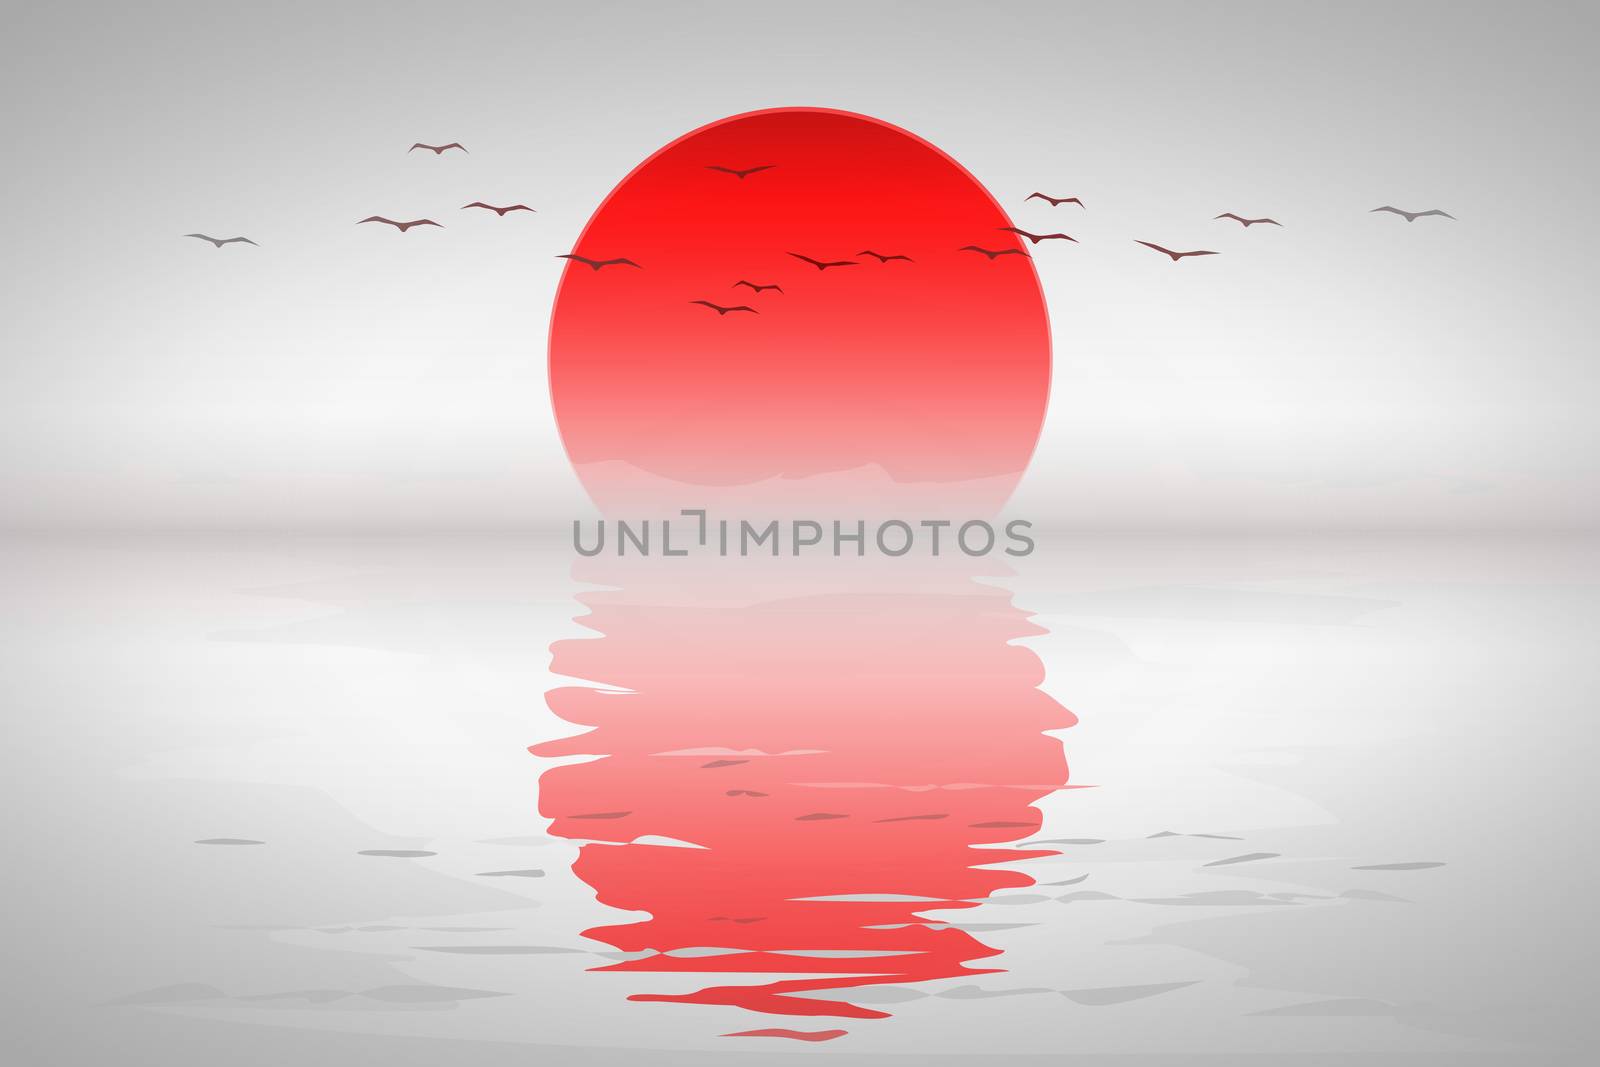 An illustration of a beautiful red sunset with birds